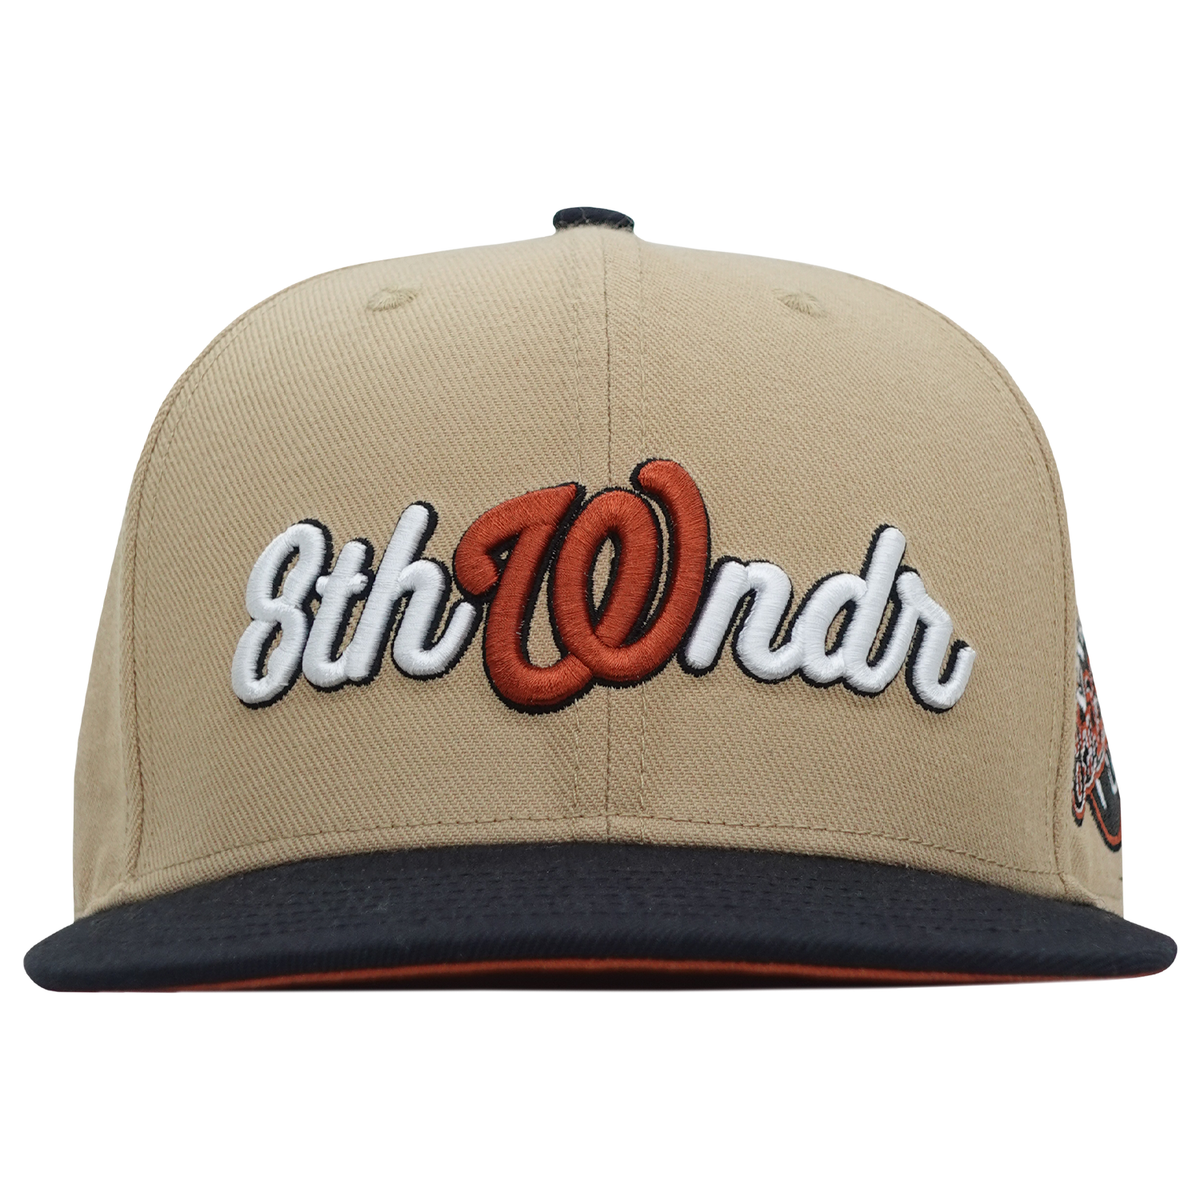 FITTED HAT COPPER / BLACK